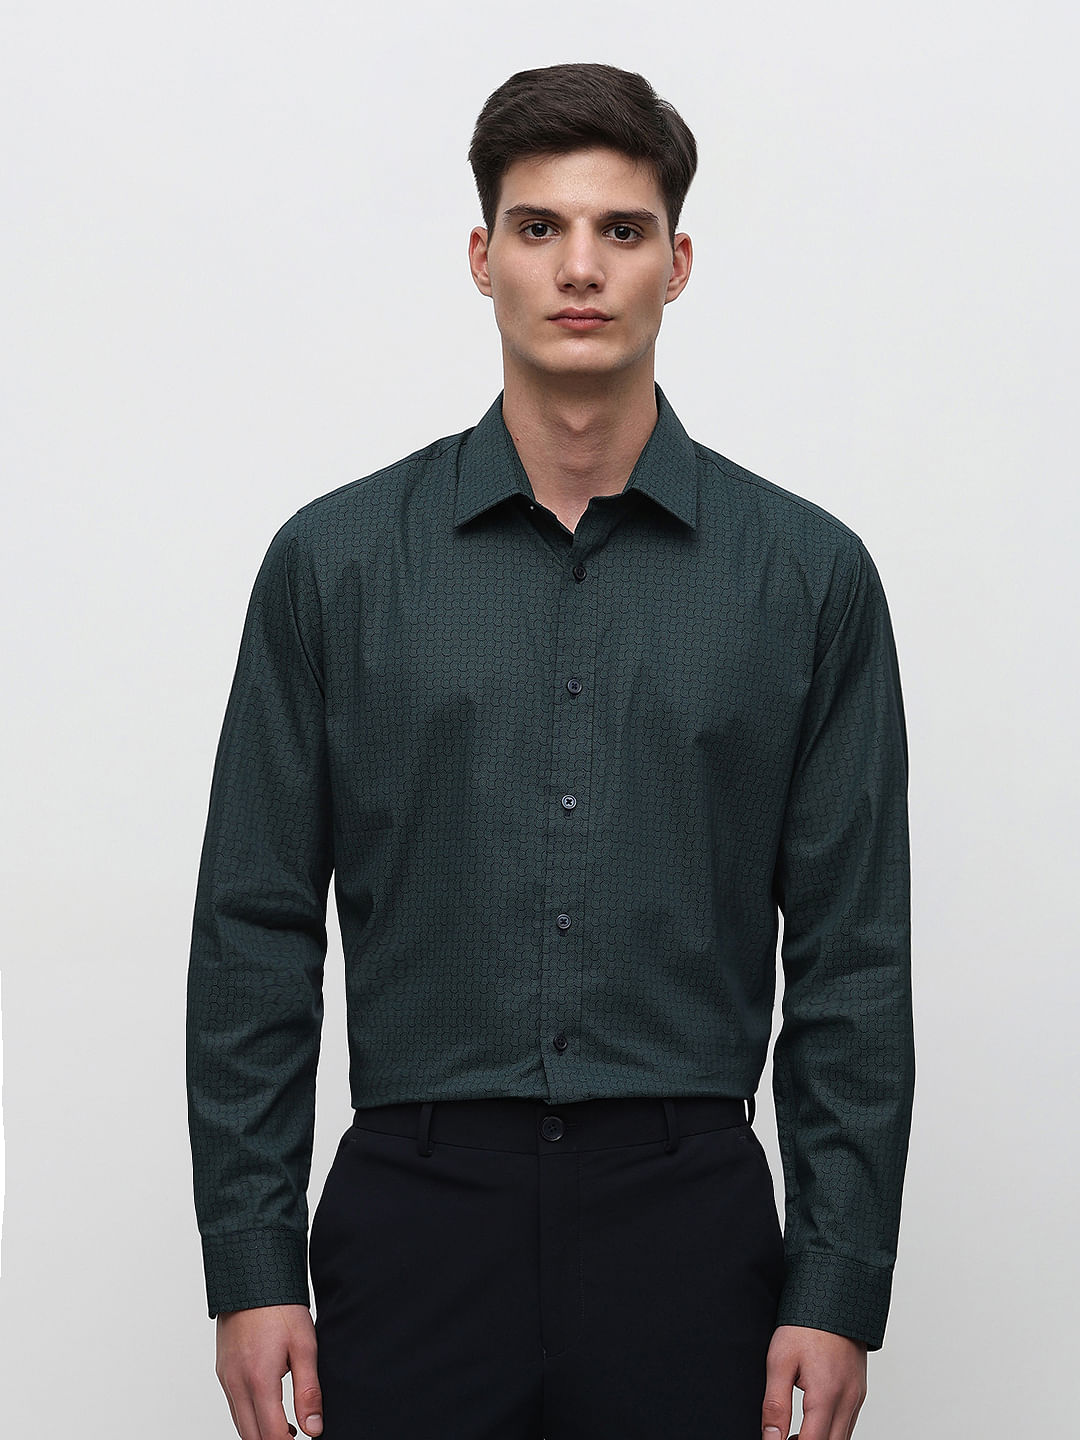 Buy WES Formals Plain Emerald Green Slim Fit Shirt from Westside